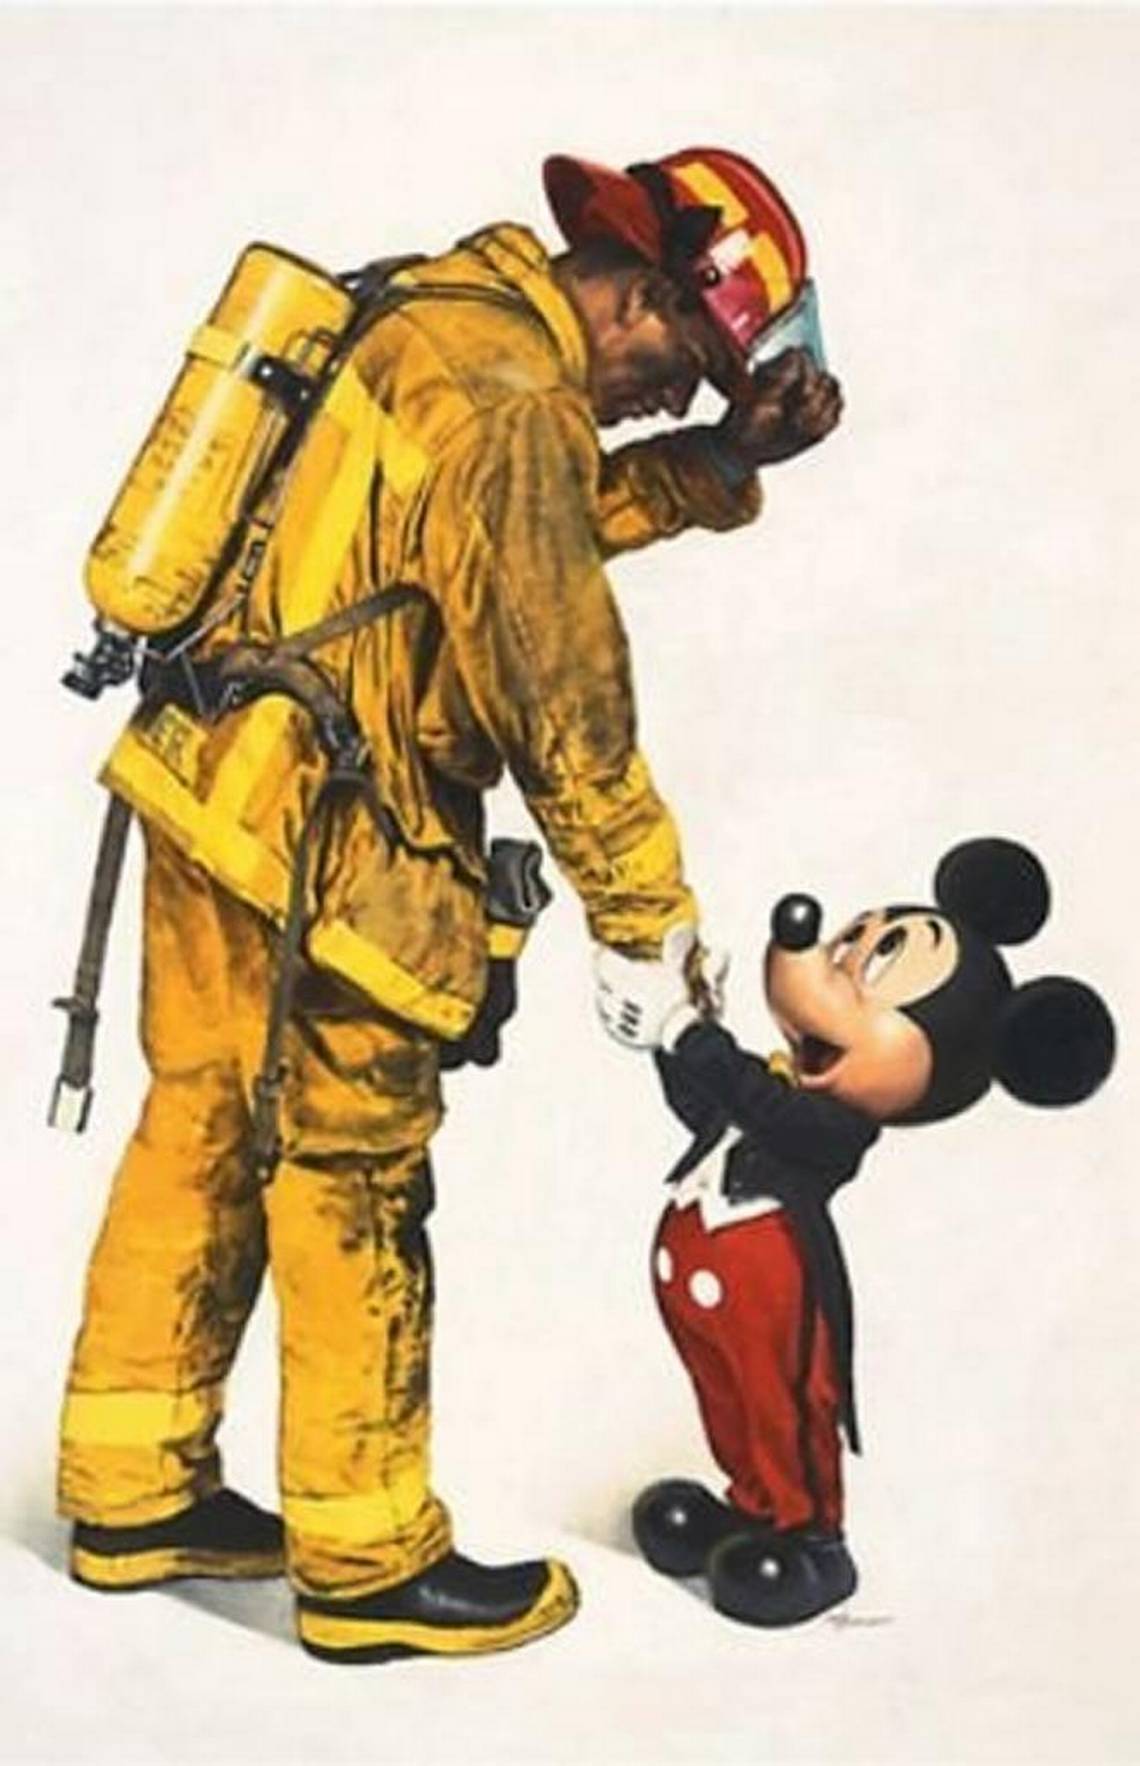 Disneyland give free tickets to Fresno firefighters | The Fresno Bee